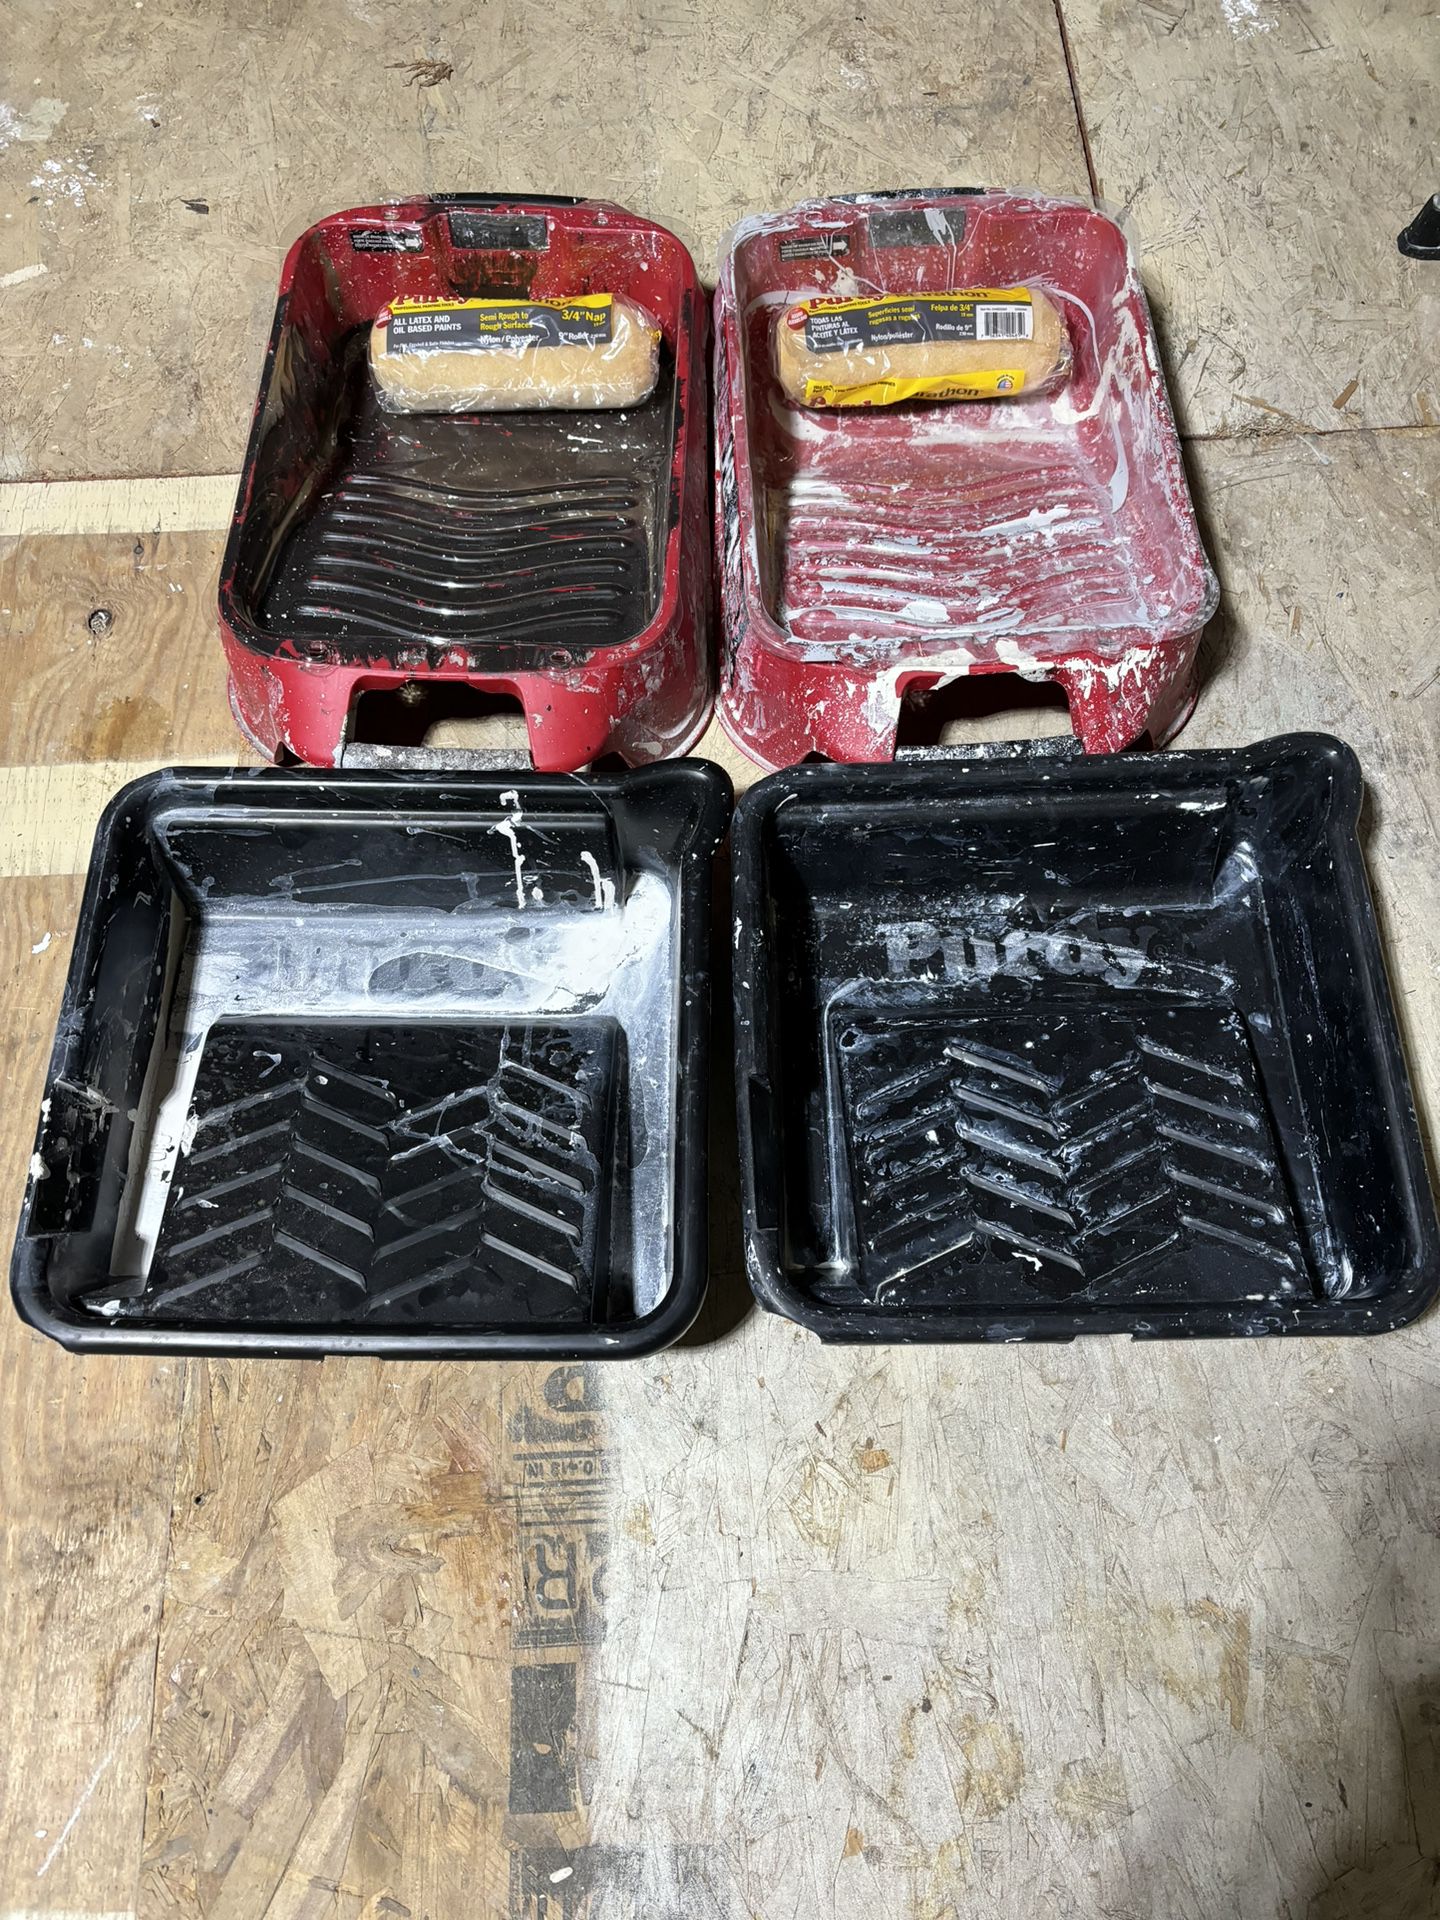 Paint Trays And Rollers